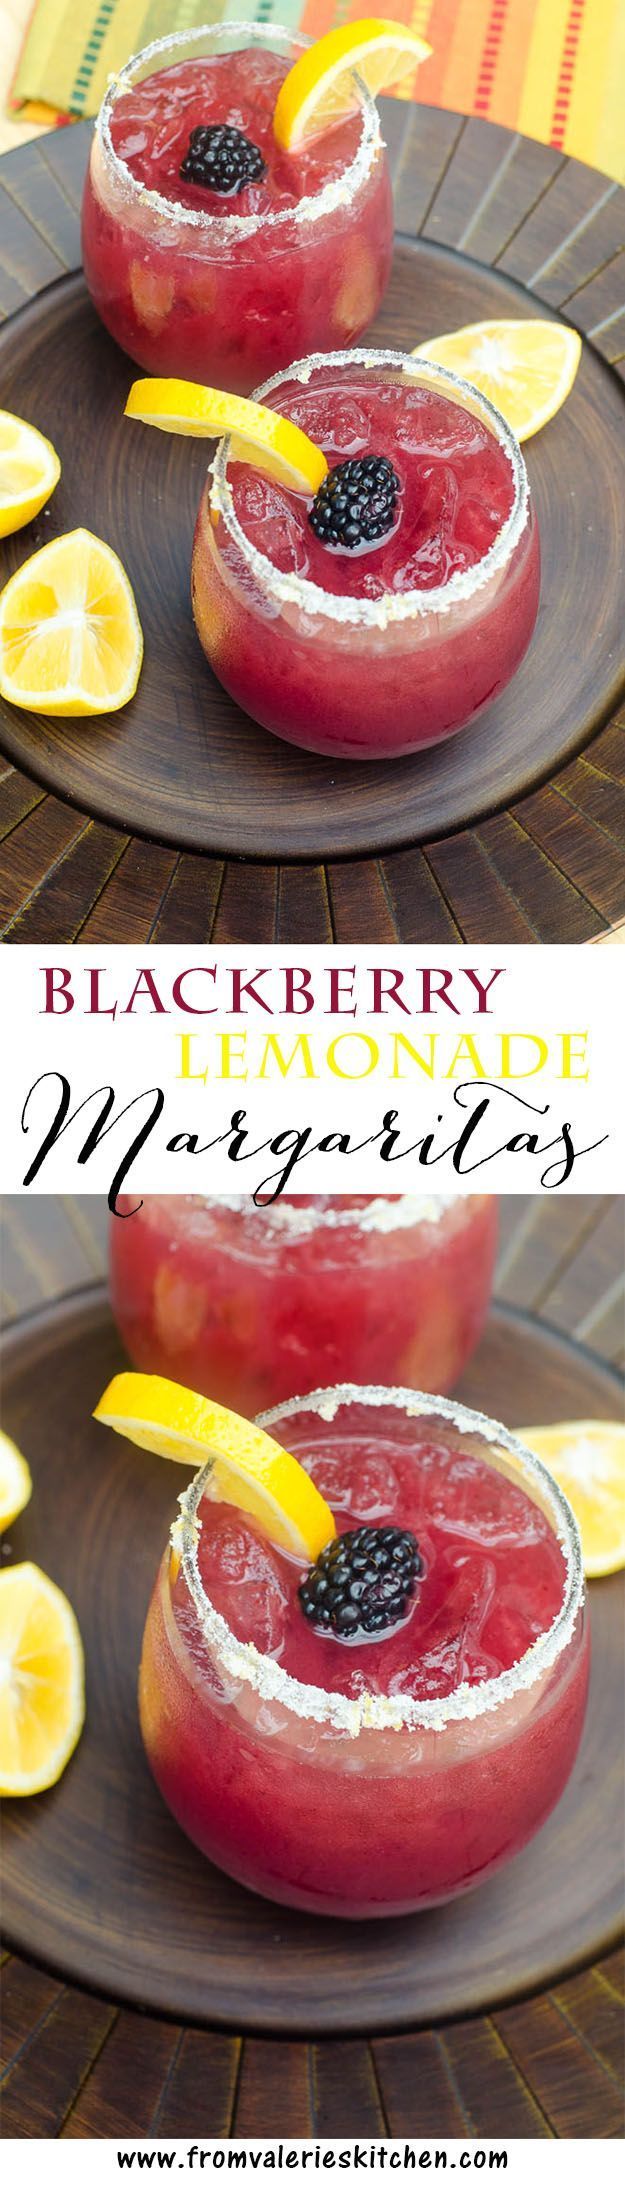 Blackberry Lemonade Margaritas – Tart, lightly sweet, and delicious. A great warm weather party drink!